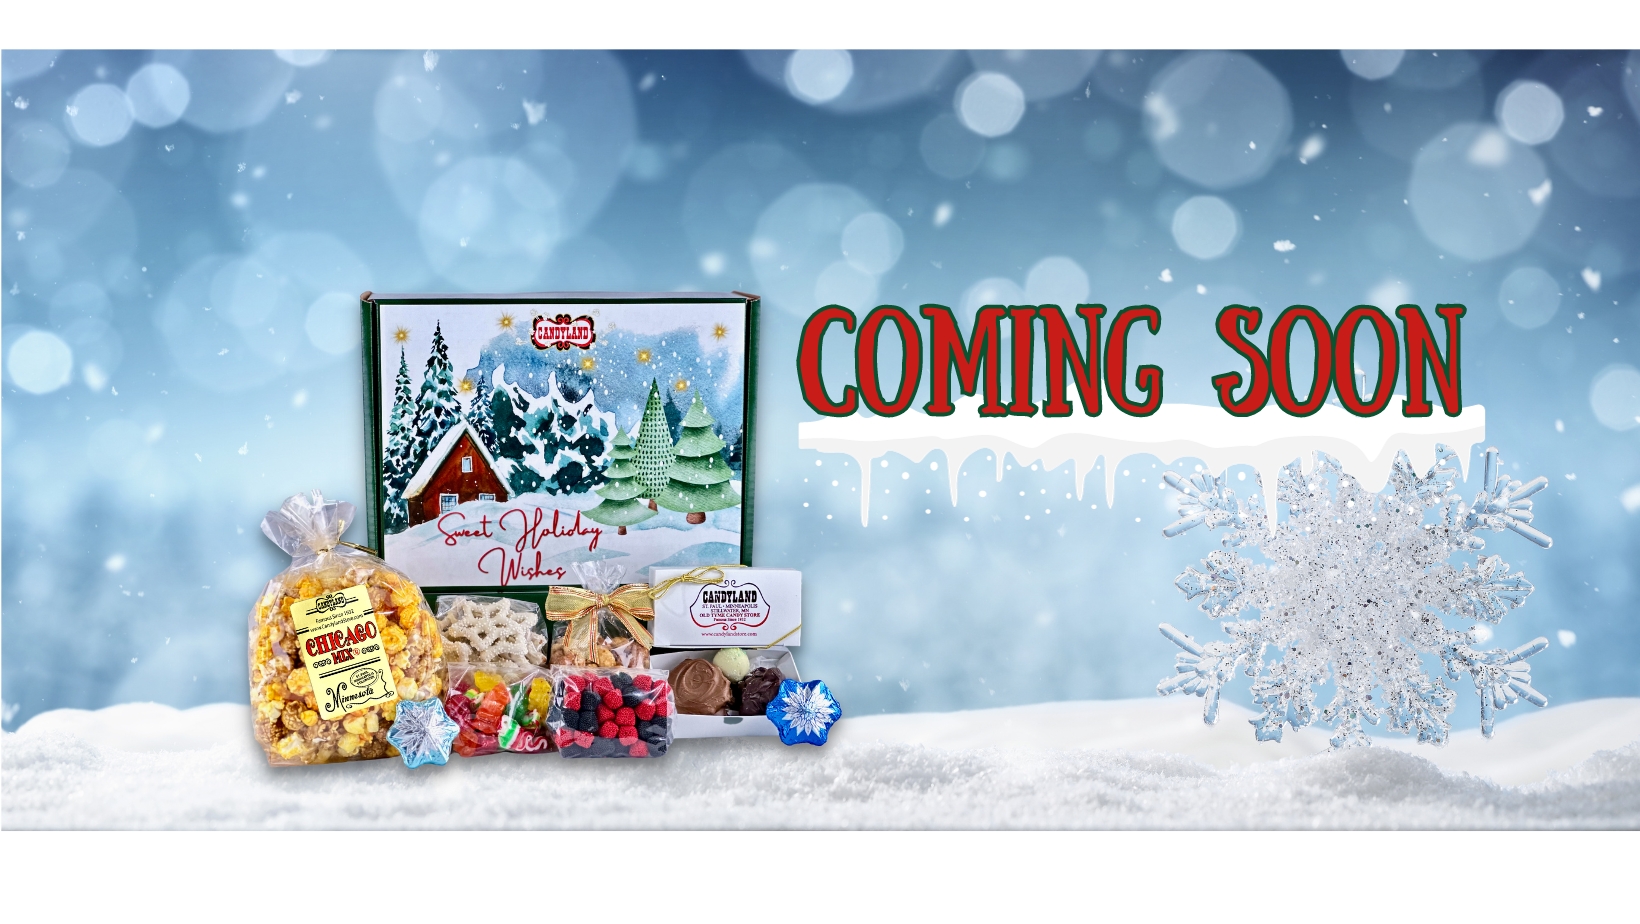 Box includes Chicago Mix® Choice of Nuts (Honey Roasted Mixed Nuts or Imperial Mixed) Snowflake Pretzels Gourmet Chocolate Box (Pecan Turtle Butter Toffee Bar Dark Chocolate Almond Cluster Whit